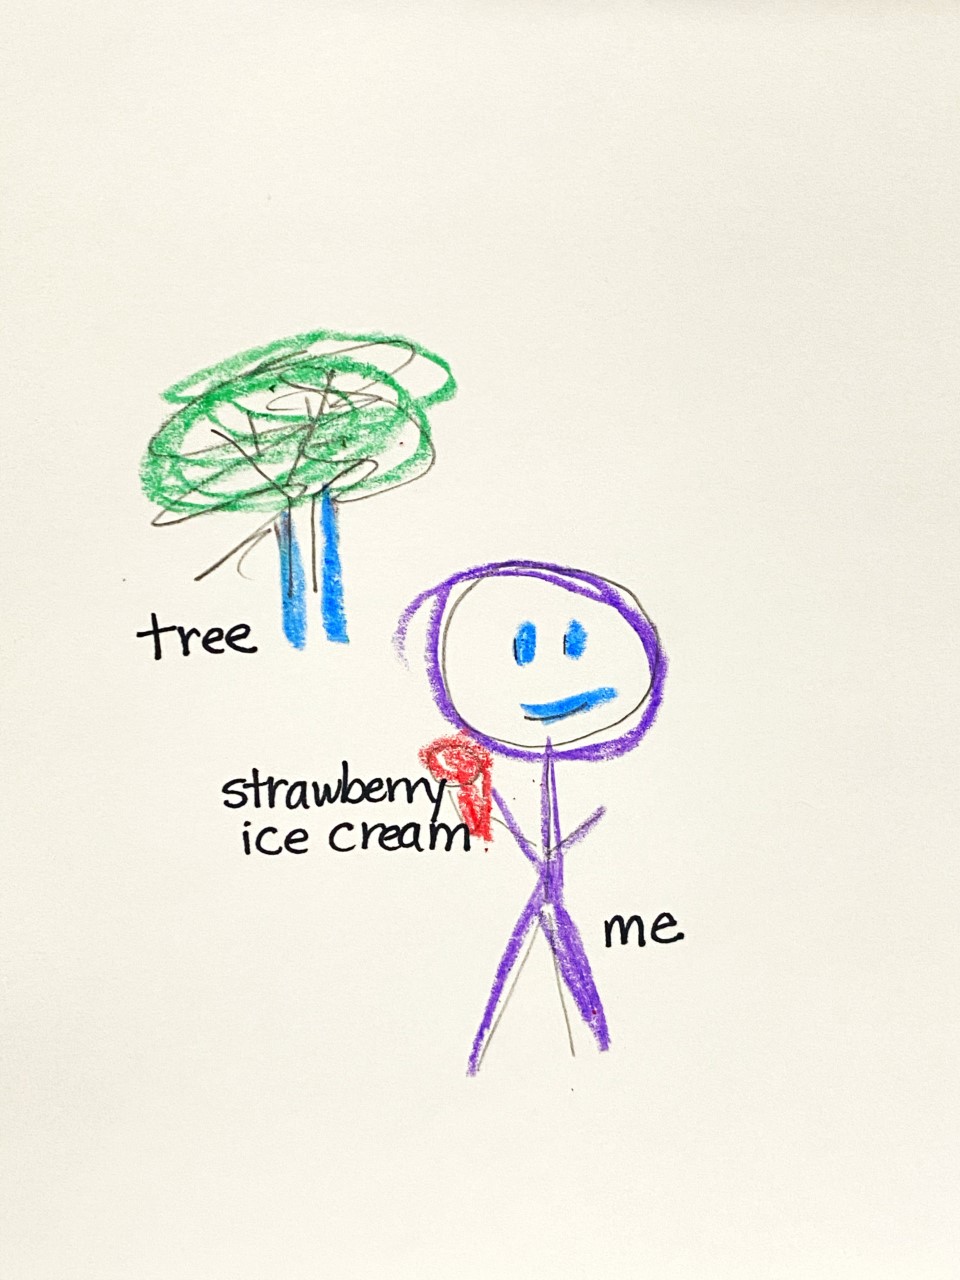 a child's drawing with labels or captions written in